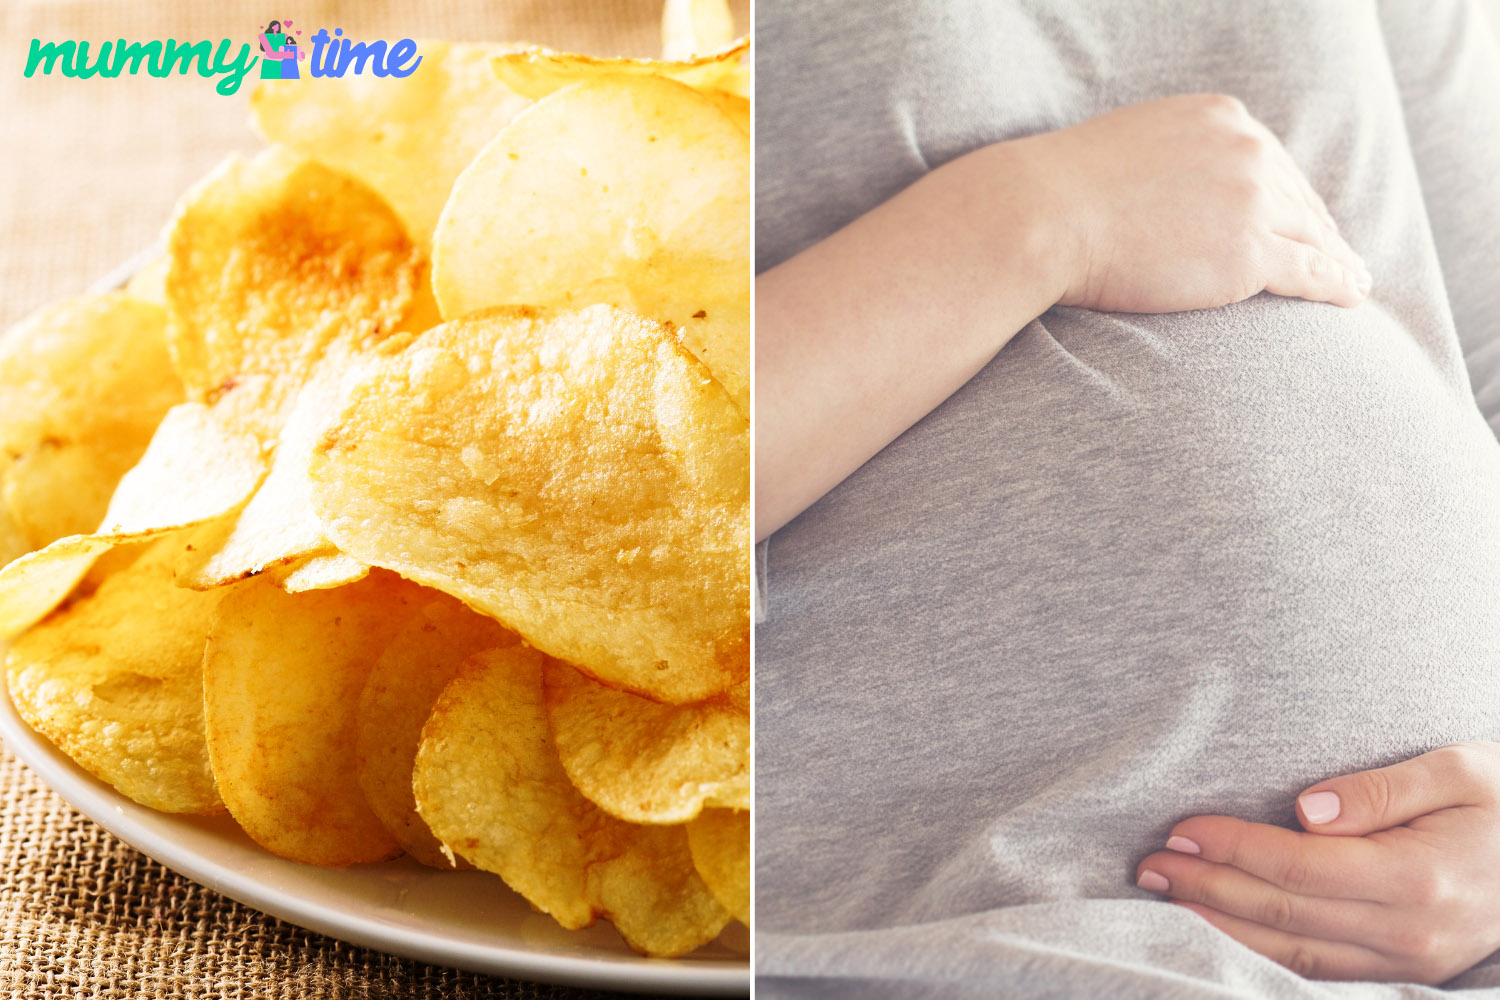 Can I Eat Salt And Vinegar Chips While Pregnant